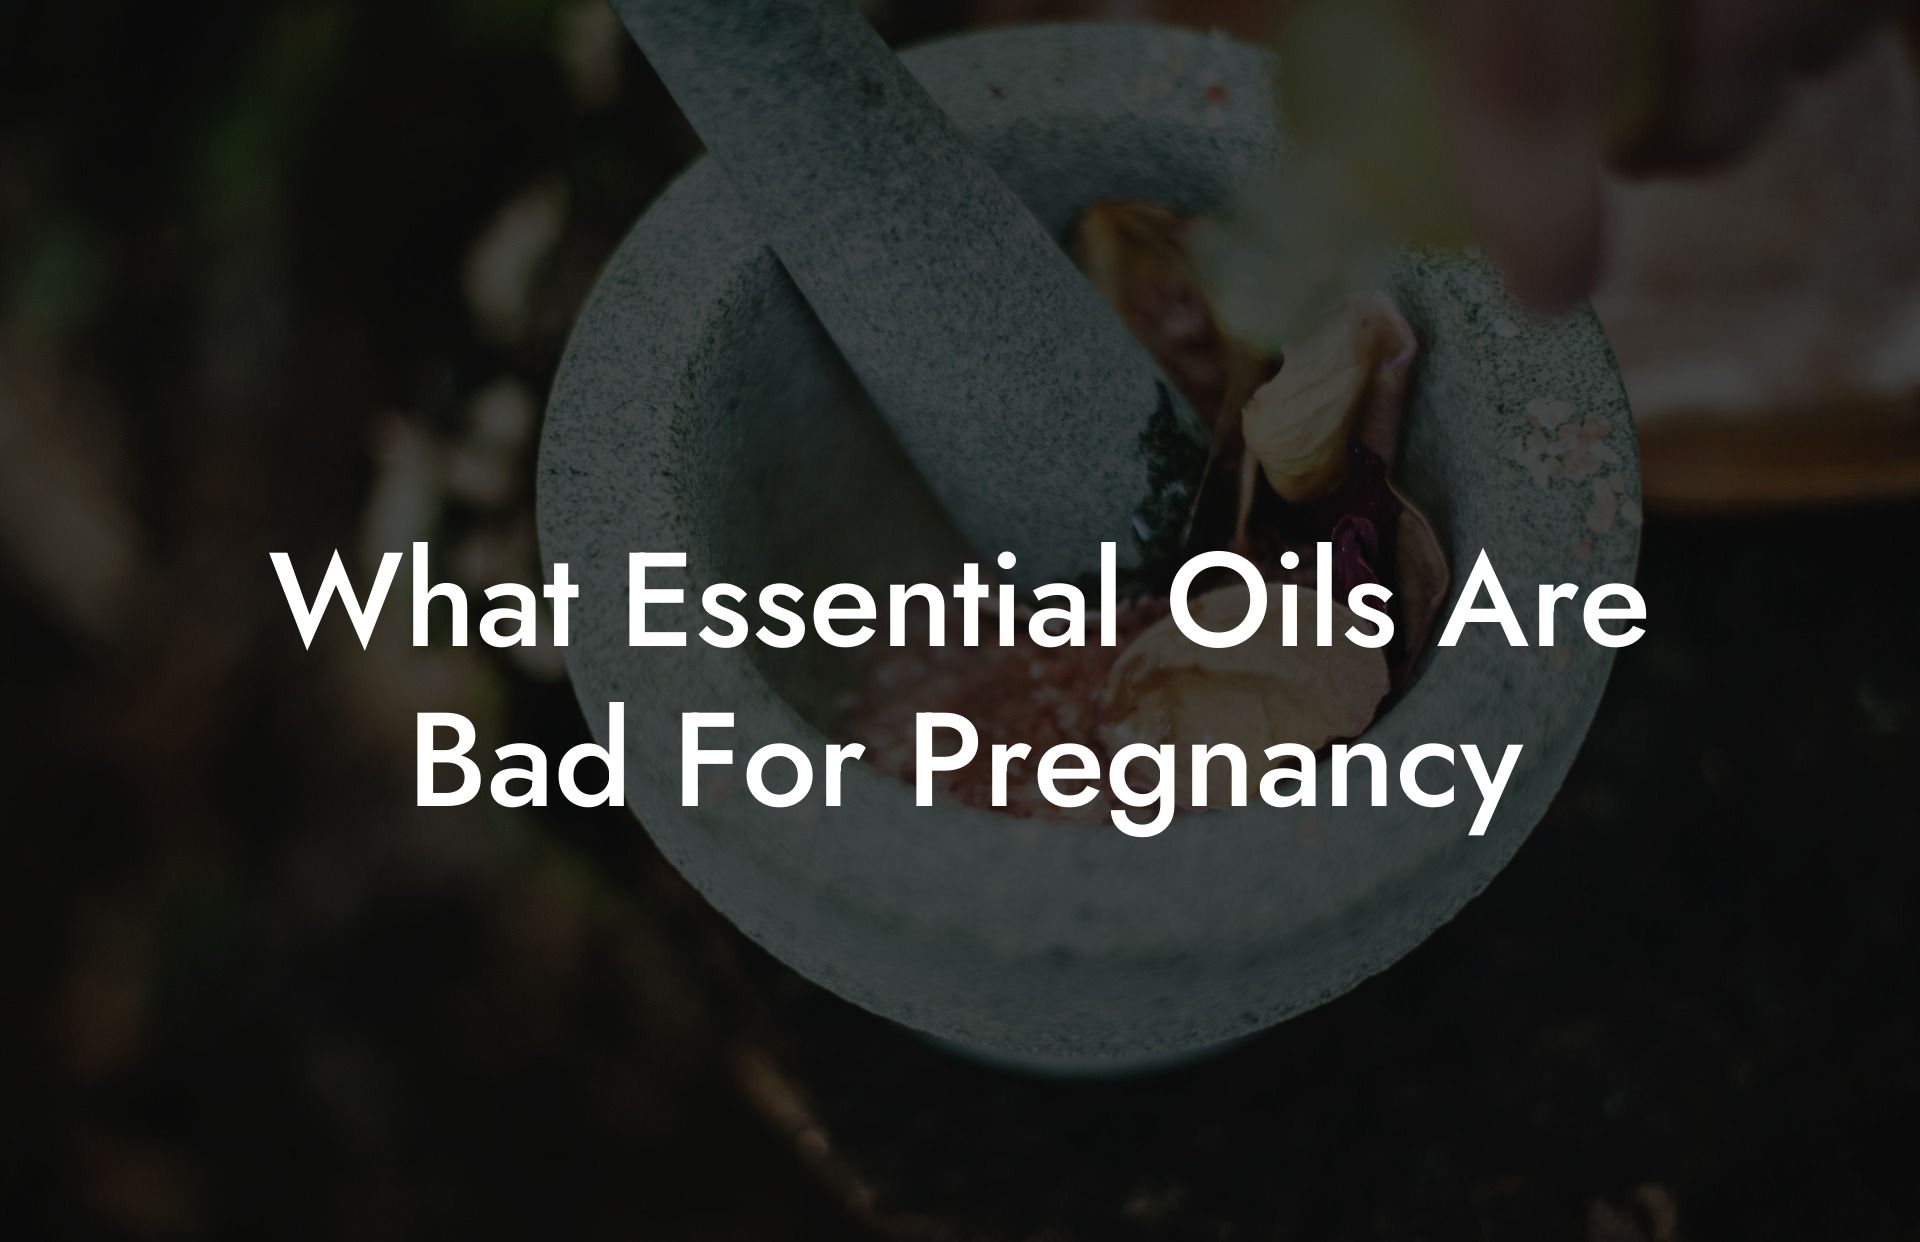 What Essential Oils Are Bad For Pregnancy